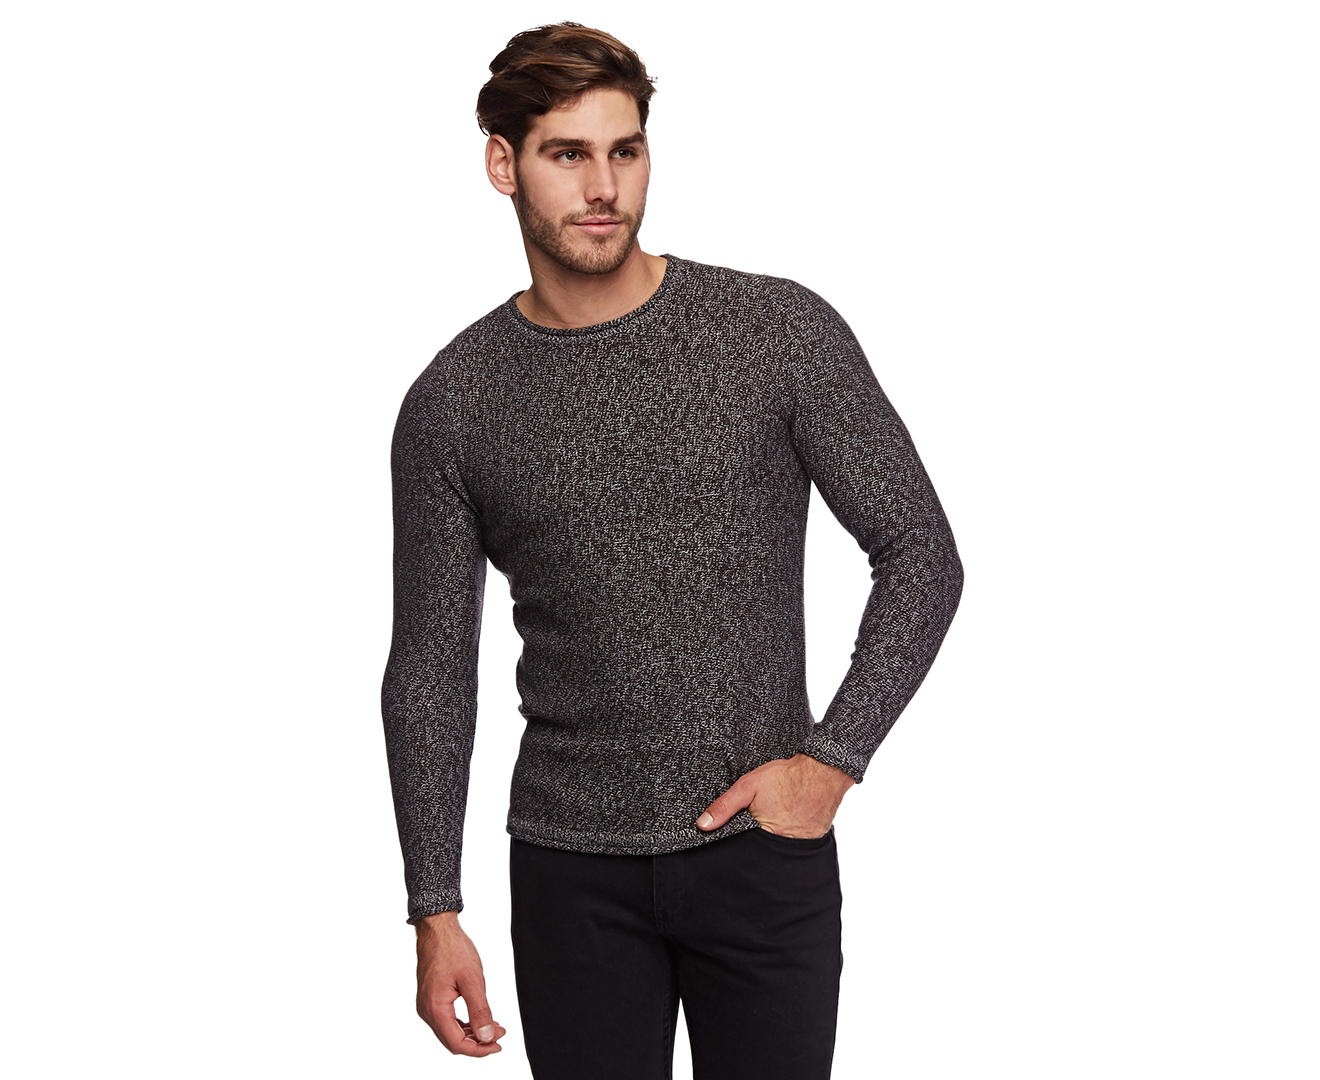 St Goliath Men's Space Knit Sweater - Charcoal | Catch.co.nz